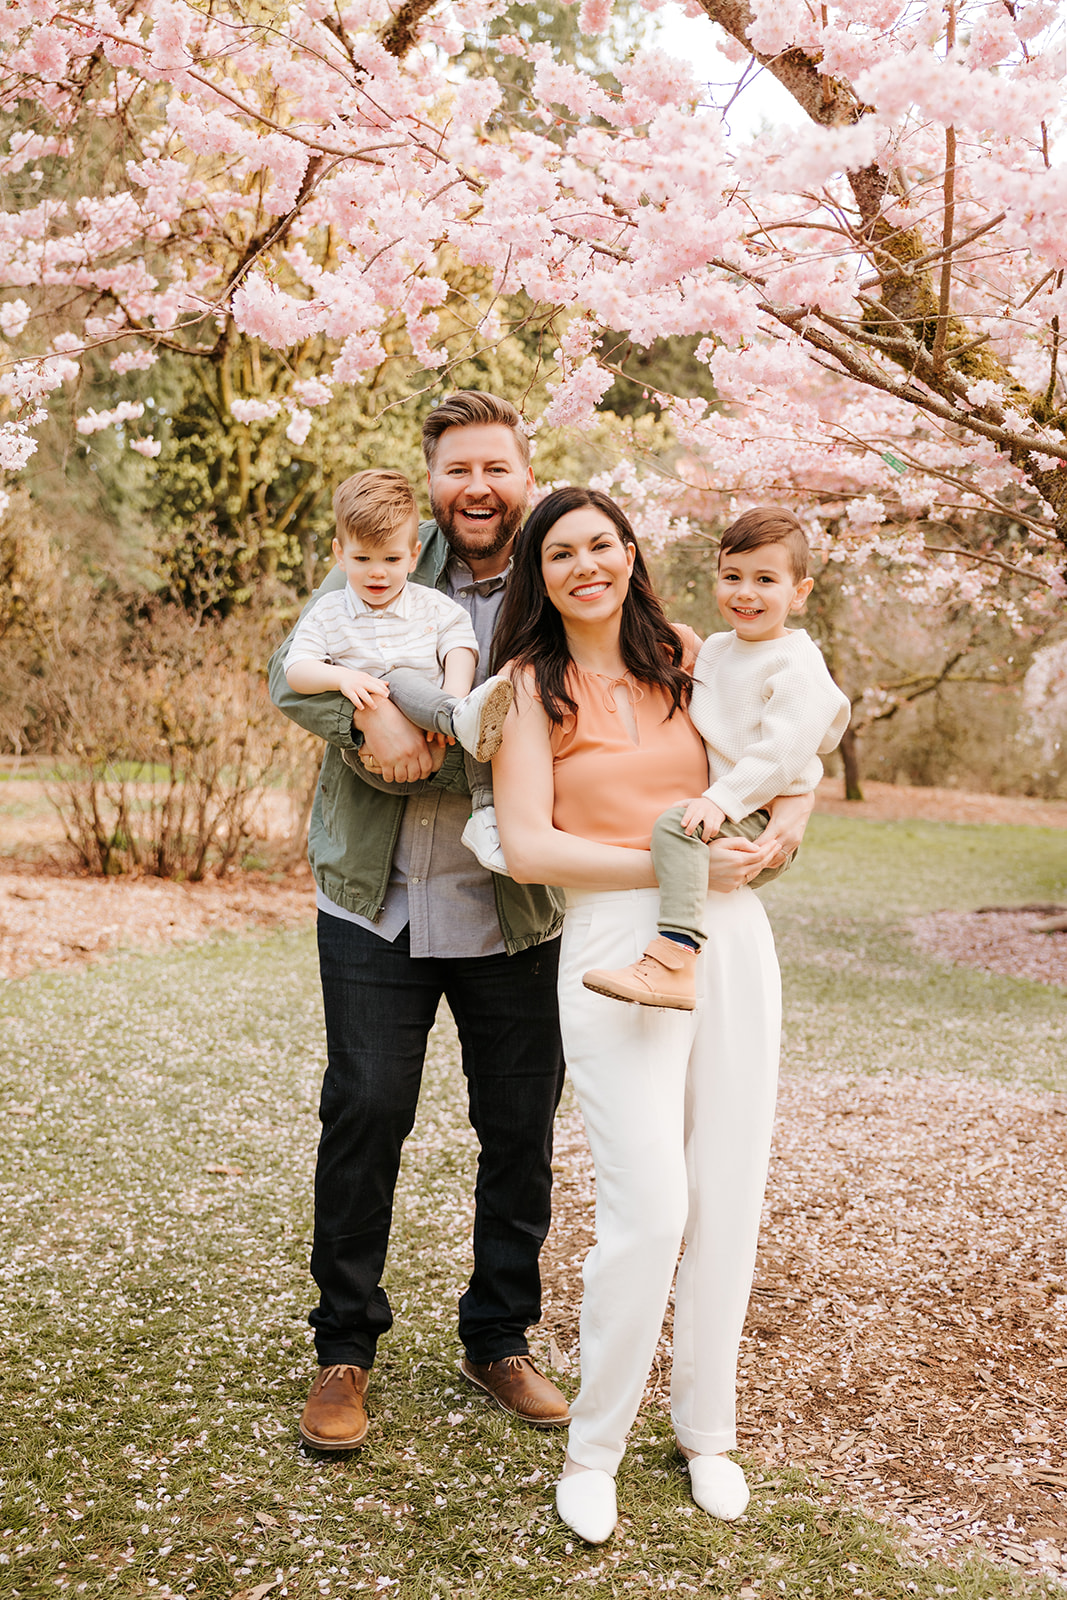 A portrait photo of a family of four standing together in front of a cherry blossom tree. 